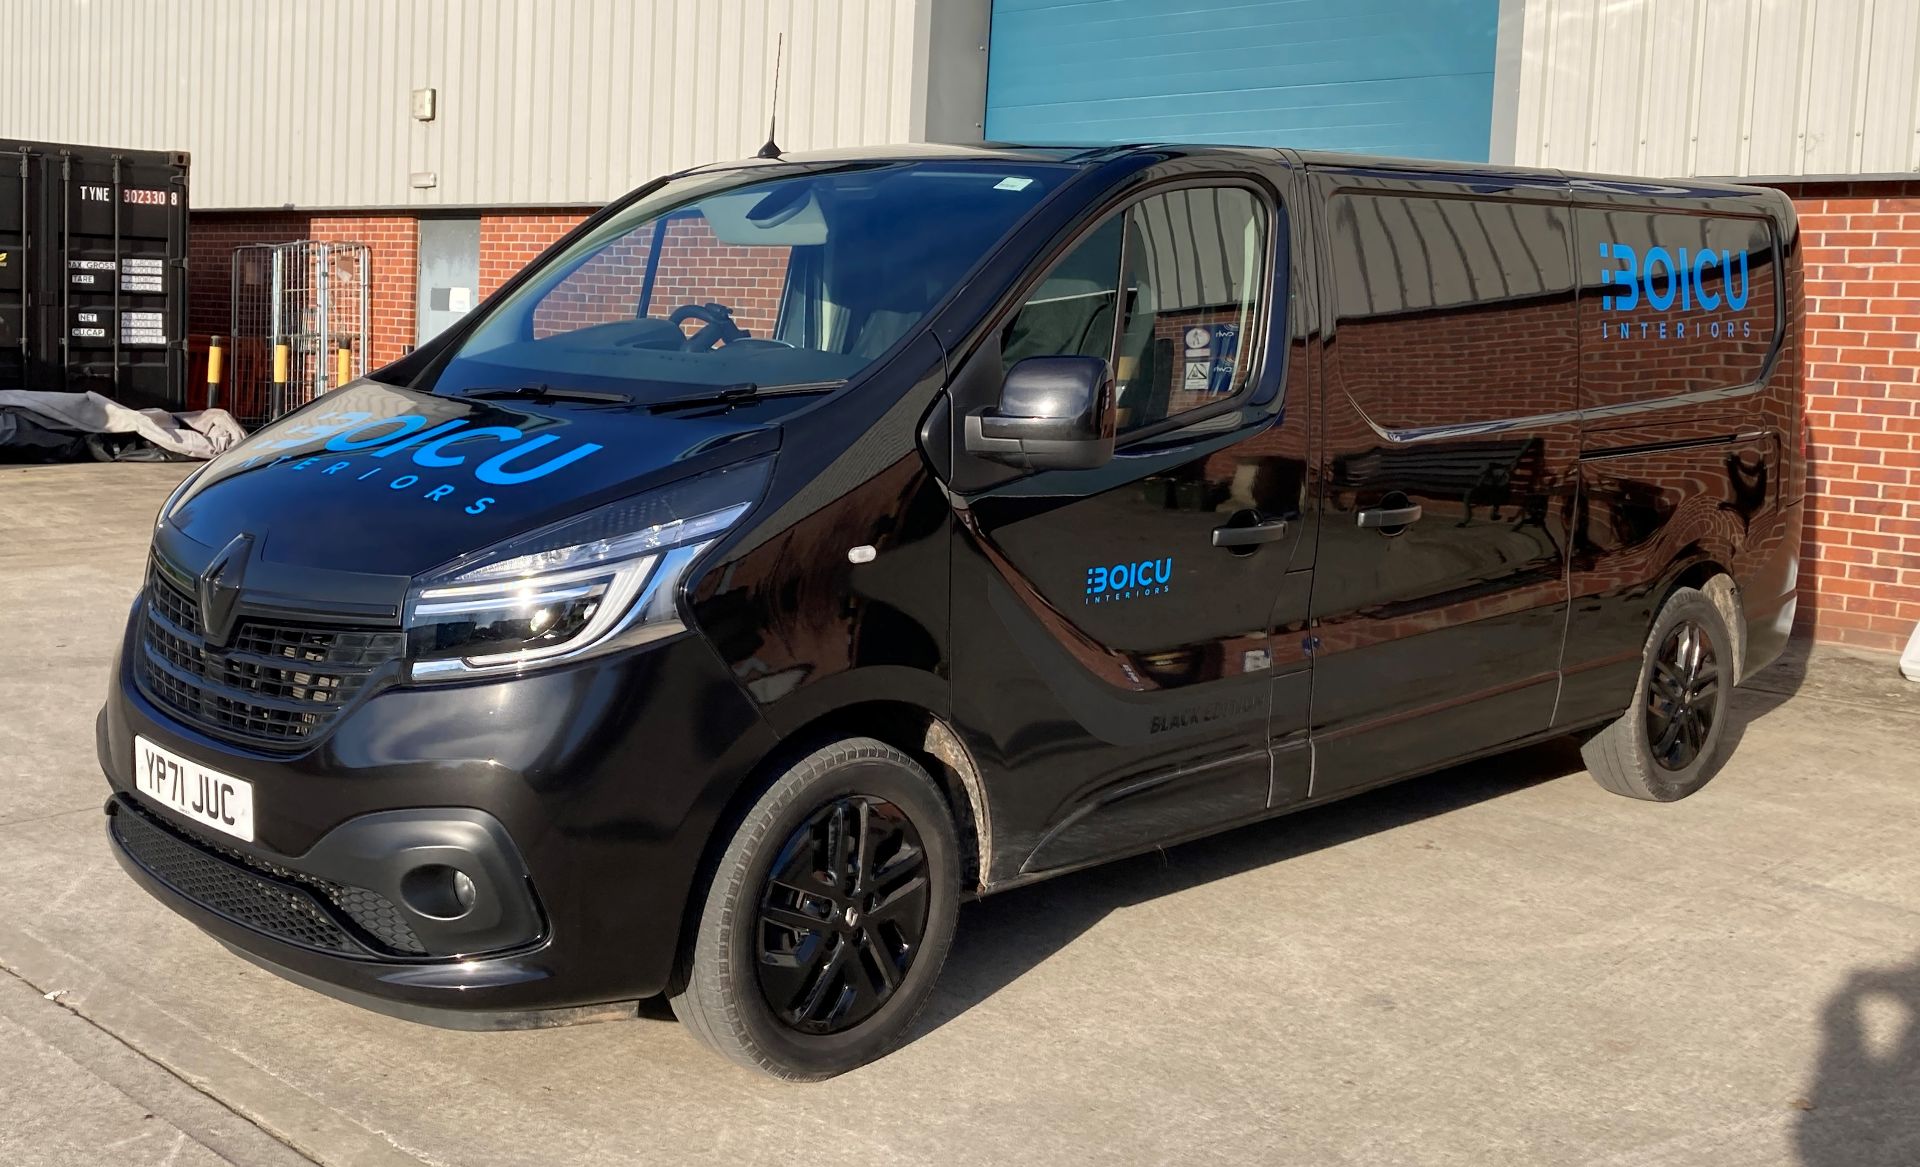 RENAULT TRAFIC LL30BLK ED ENGY D PANEL VAN - AUTOMATIC - Diesel - Black. - Image 6 of 45